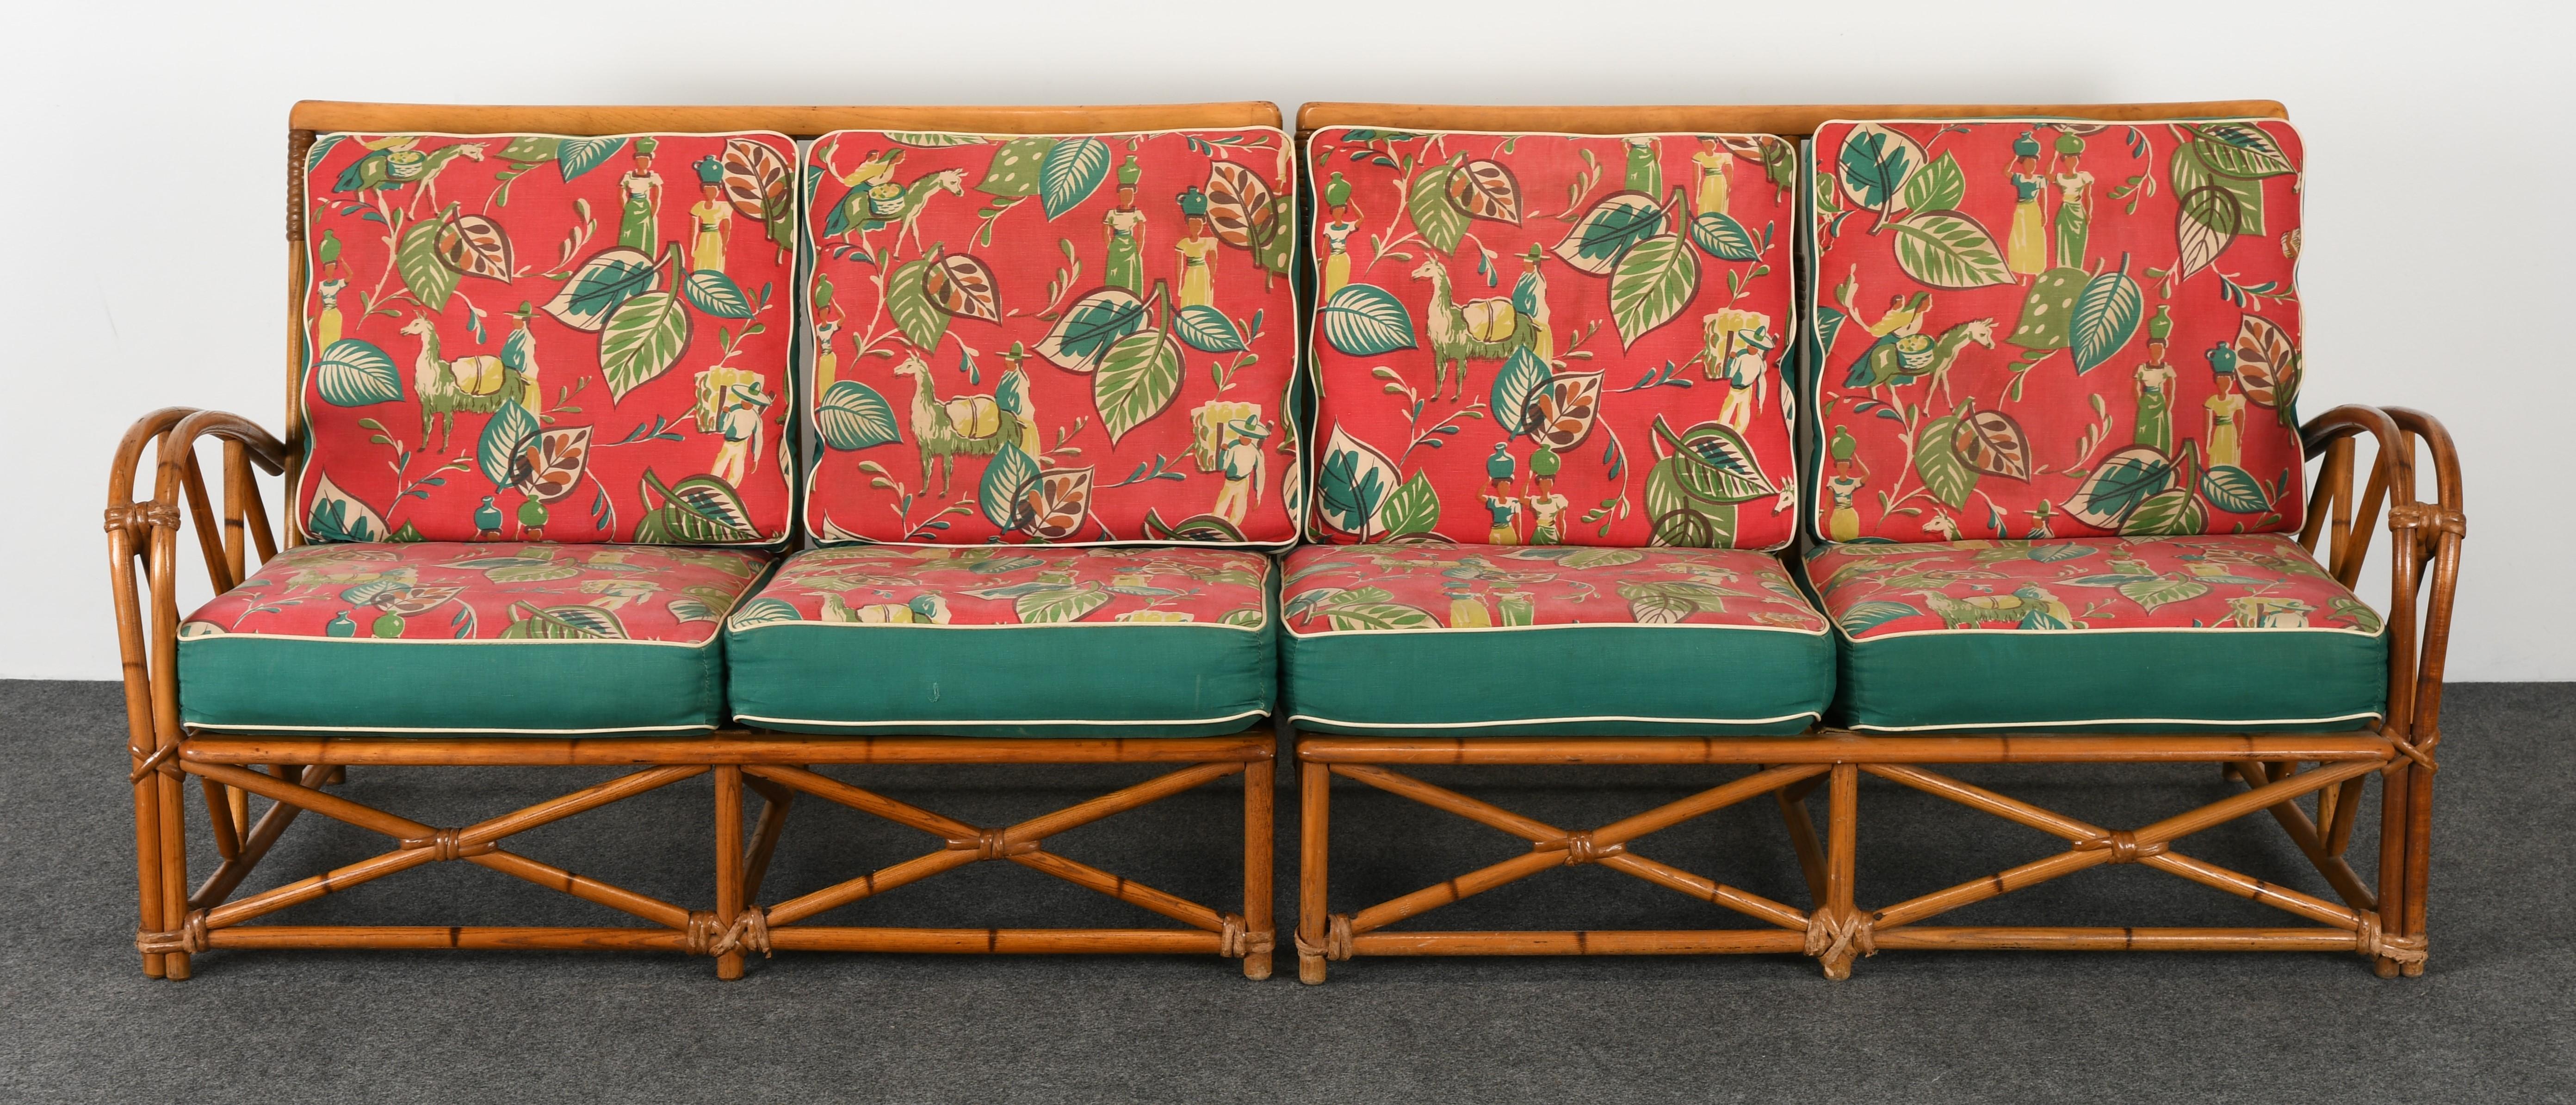 A handsome faux rattan sofa made of oak wood and upholstered cushions by Heywood Wakefield, circa 1950s. This beautiful sofa is structurally sound but has some loose rattan wrappings or windings. The sofa cushions have the original vintage fabric